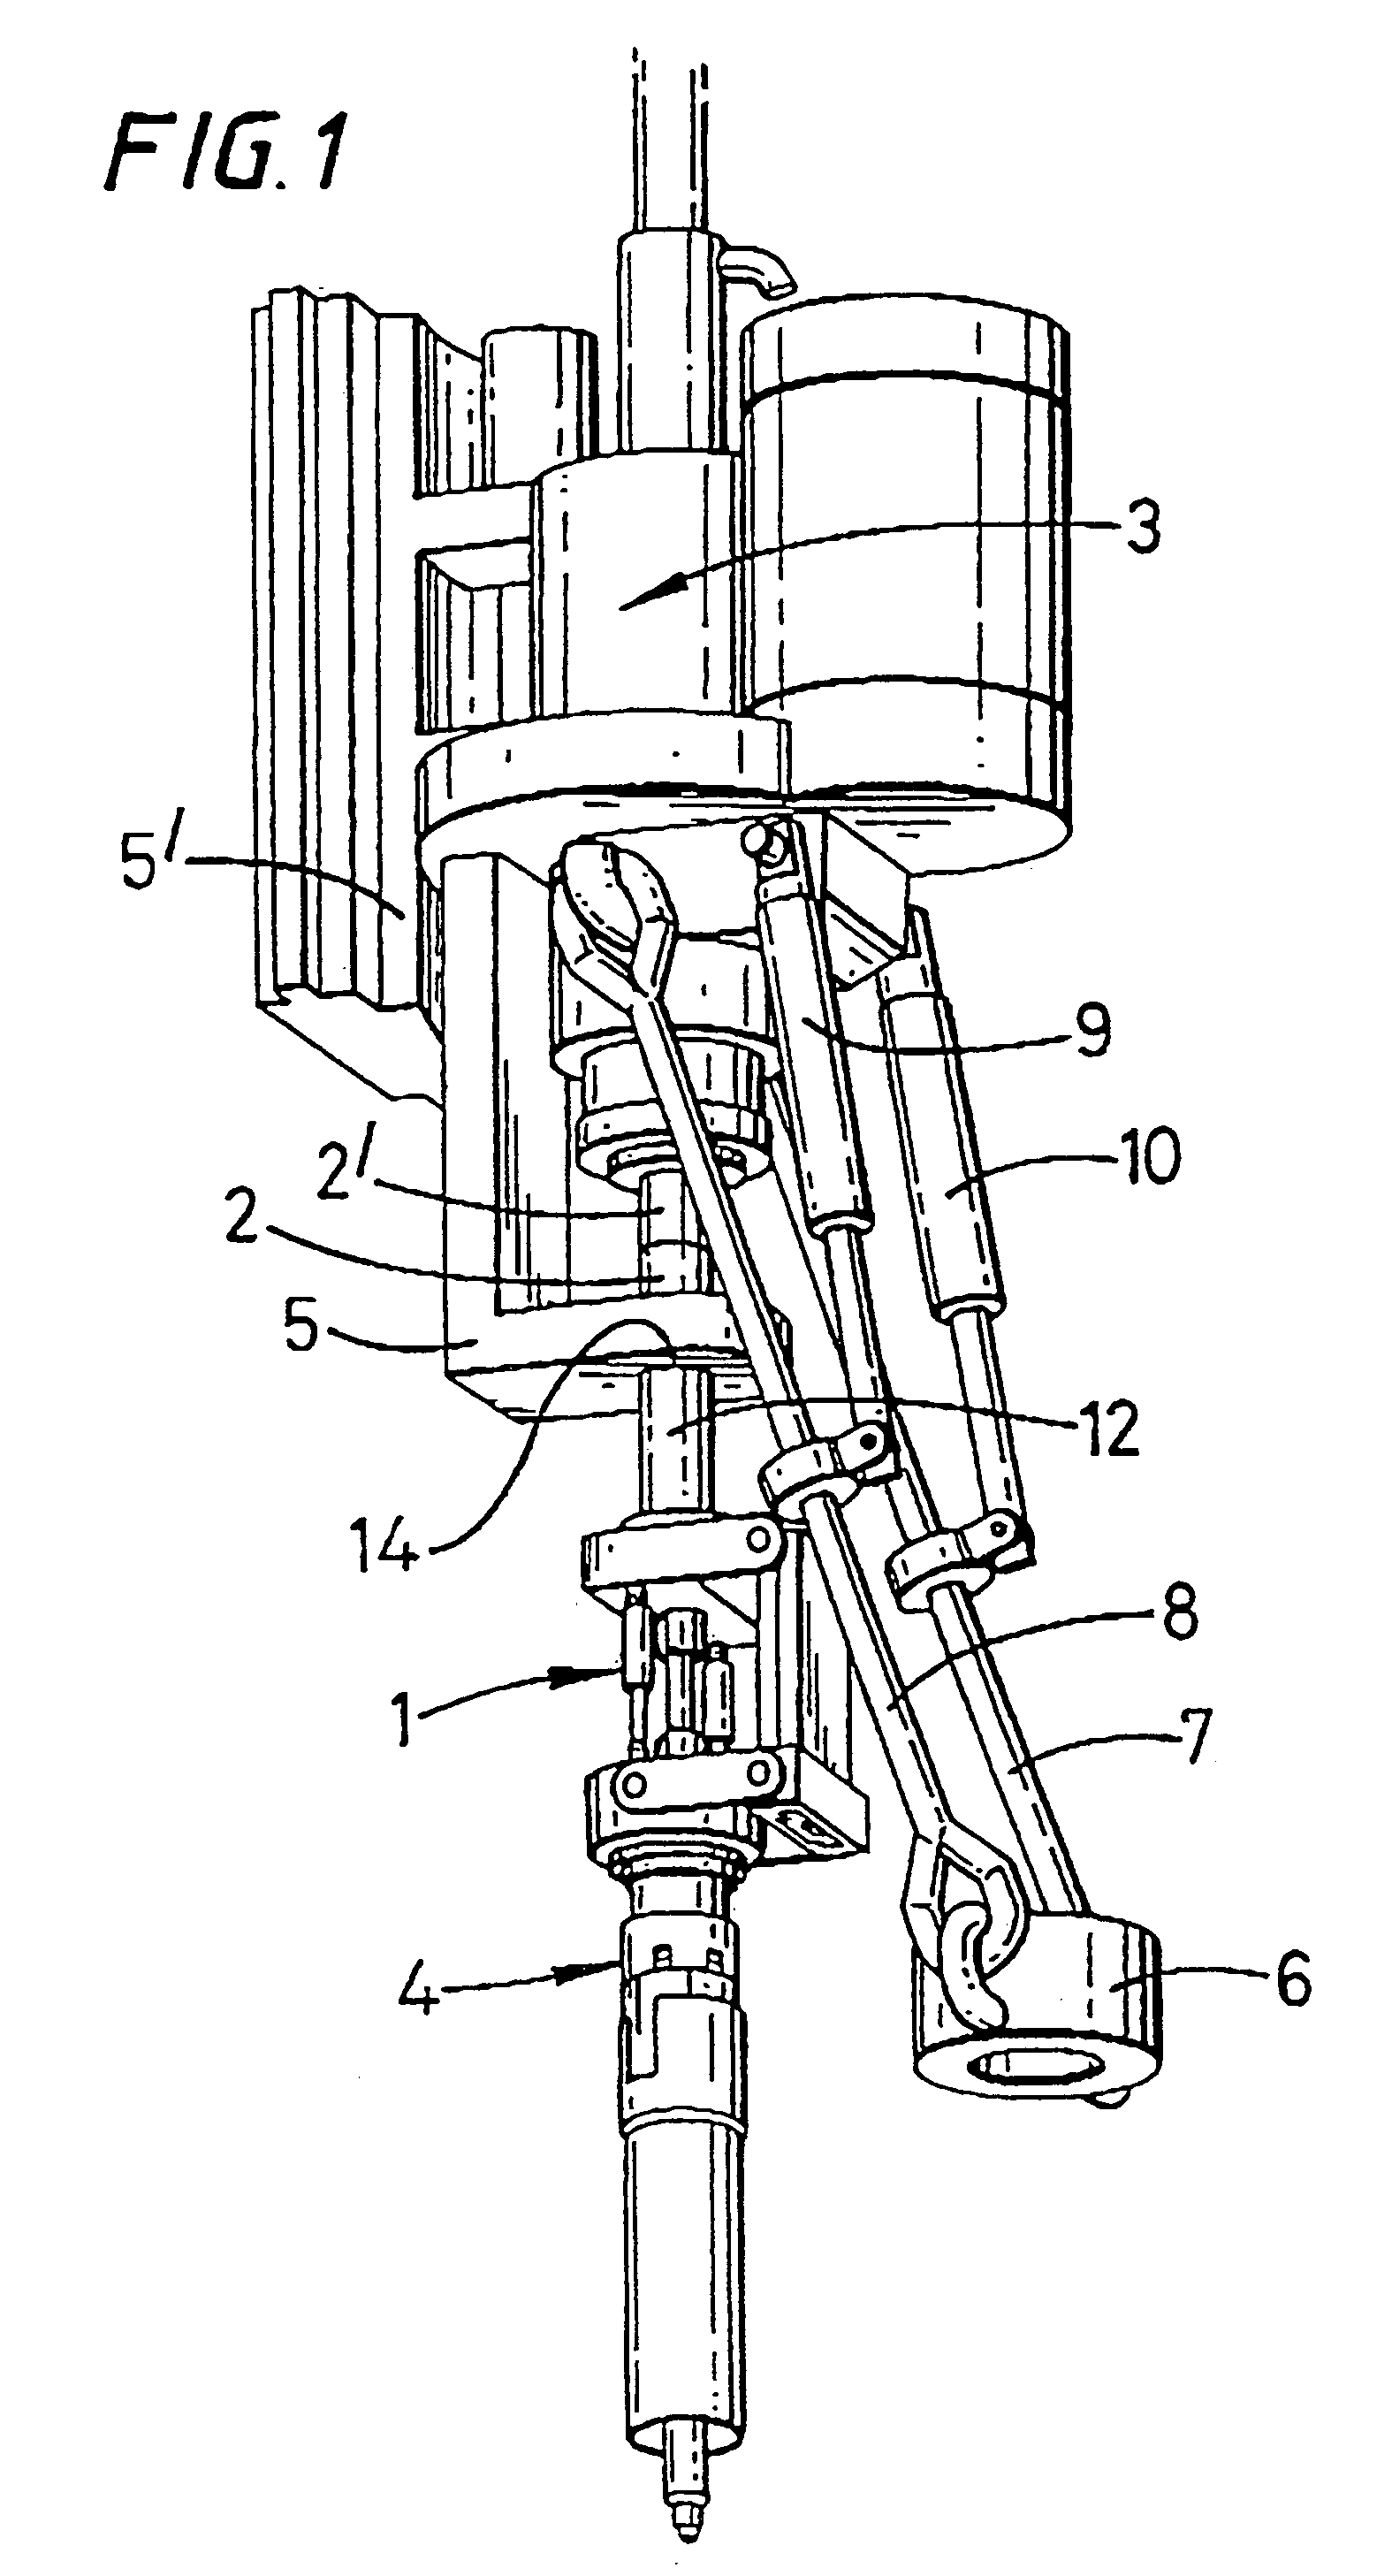 Methods and apparatus for connecting tubulars using a top drive